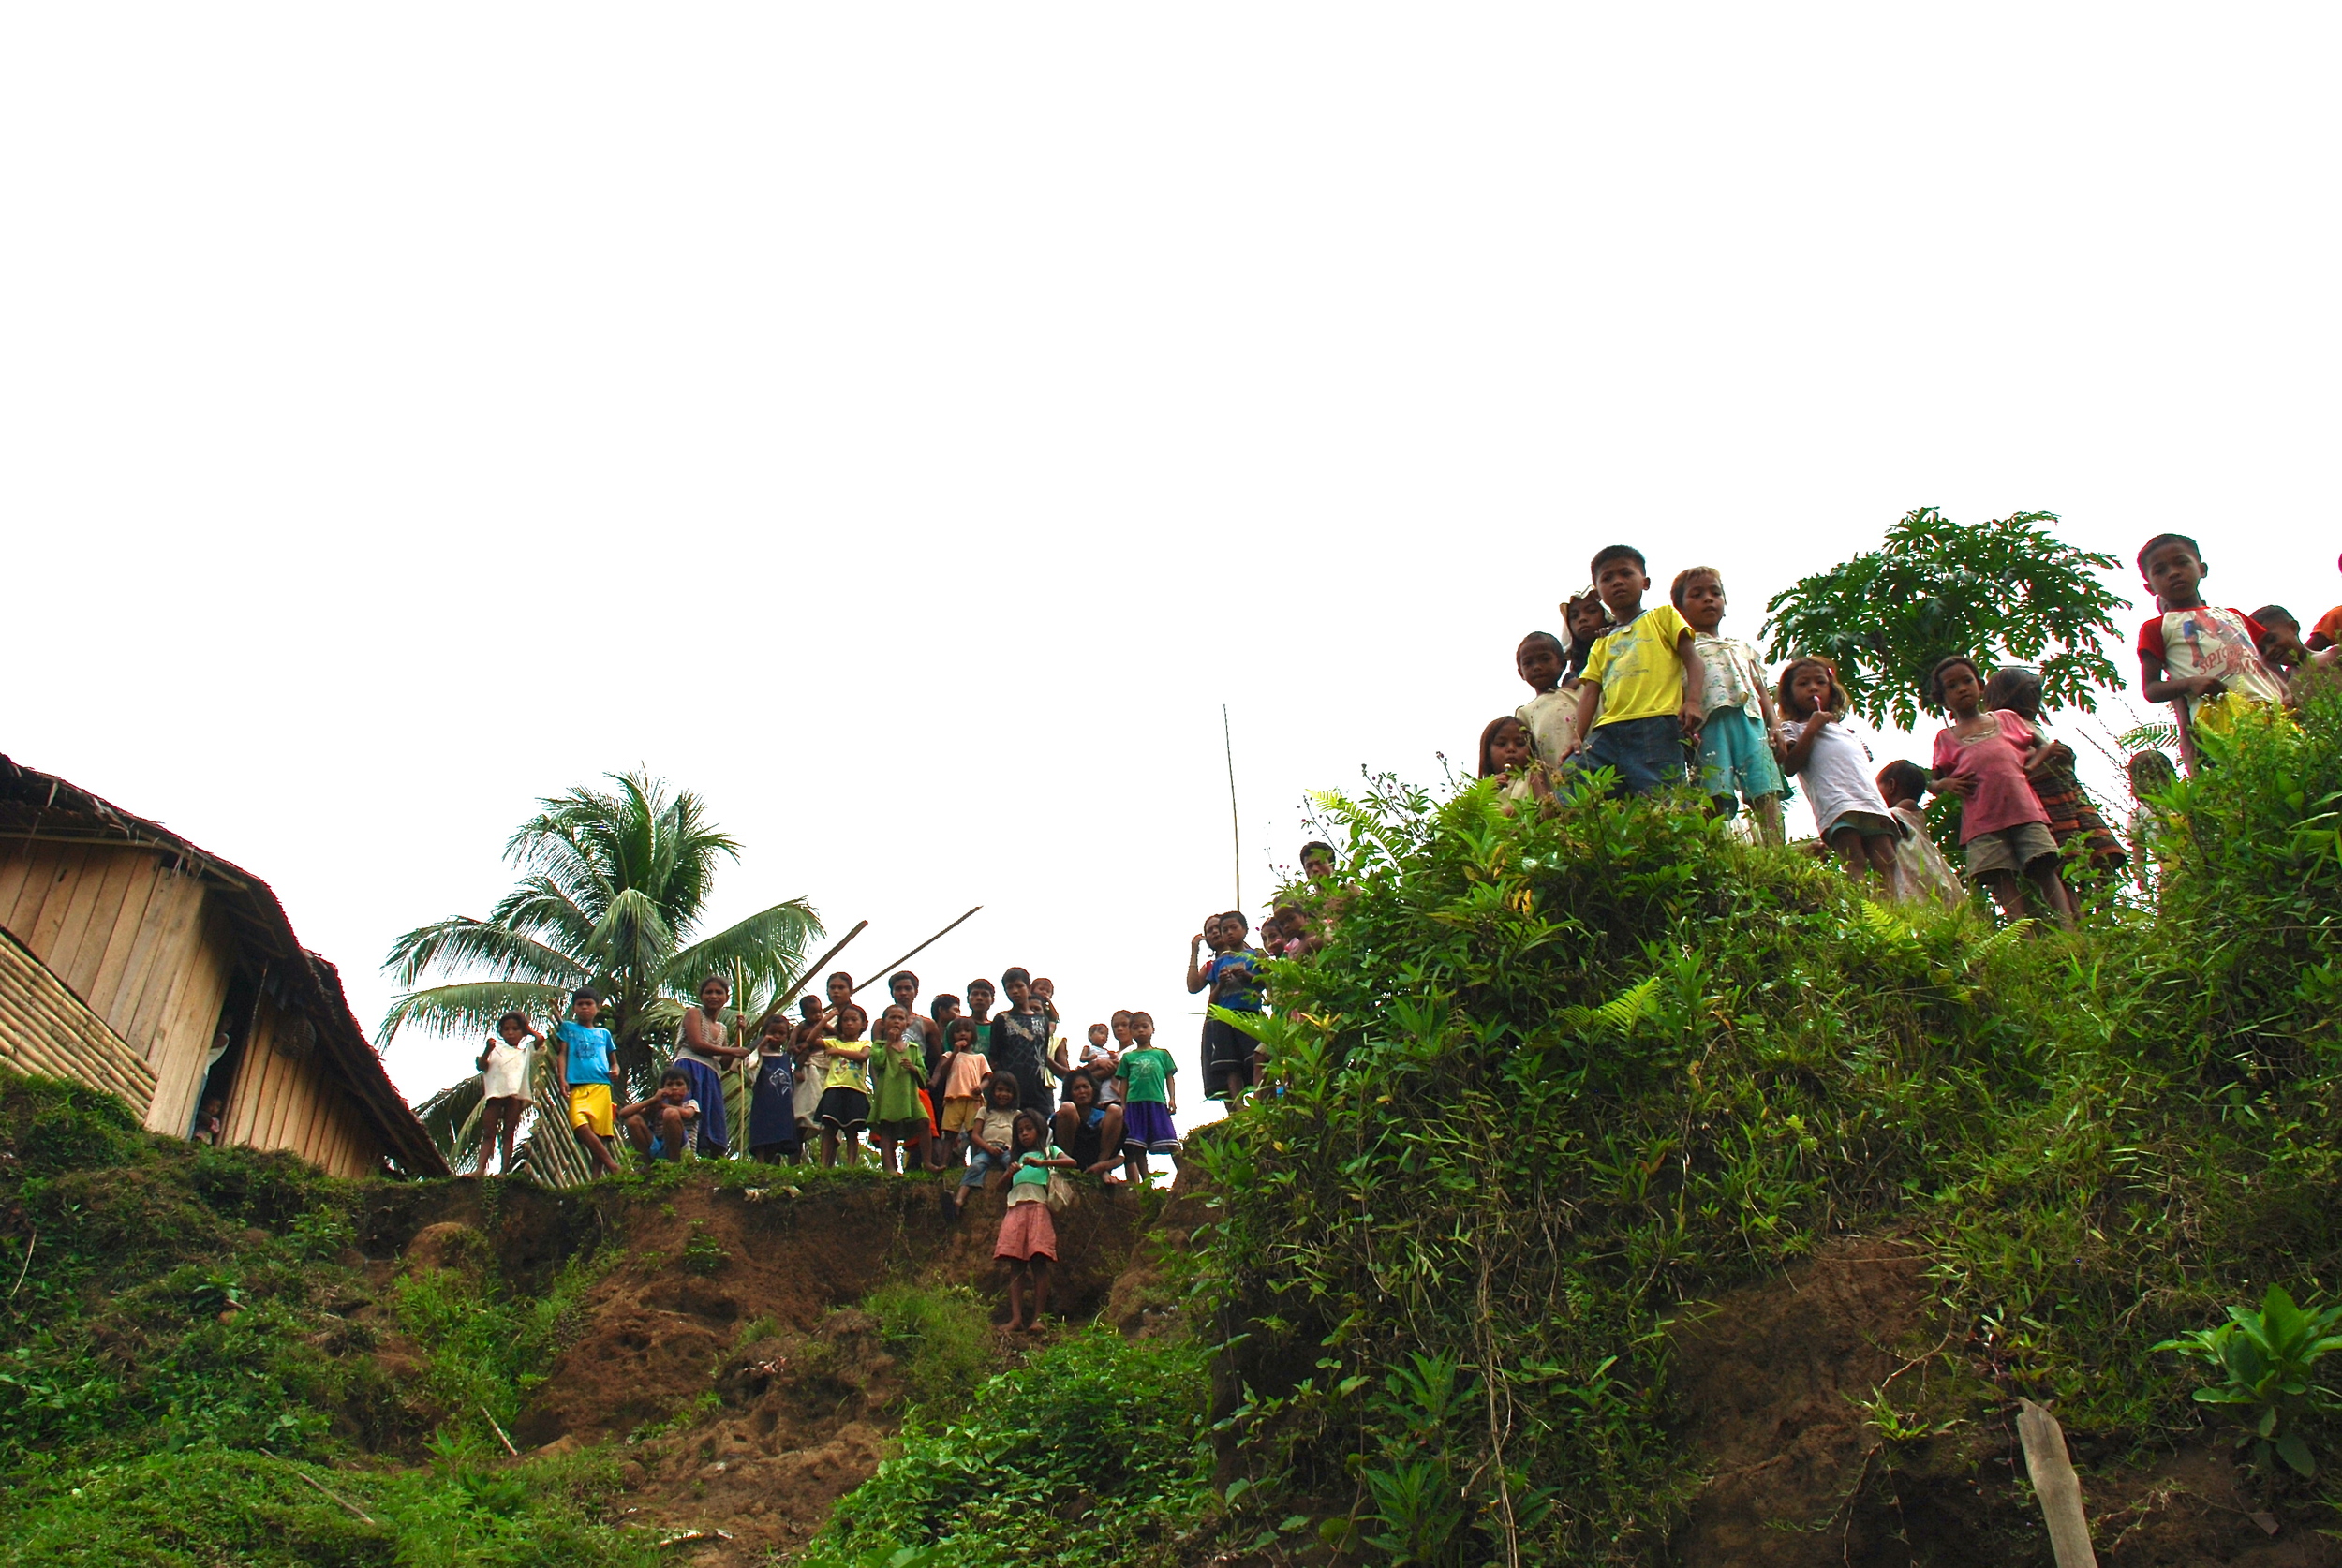 Children waiting for a school in the mountains of Mindanao